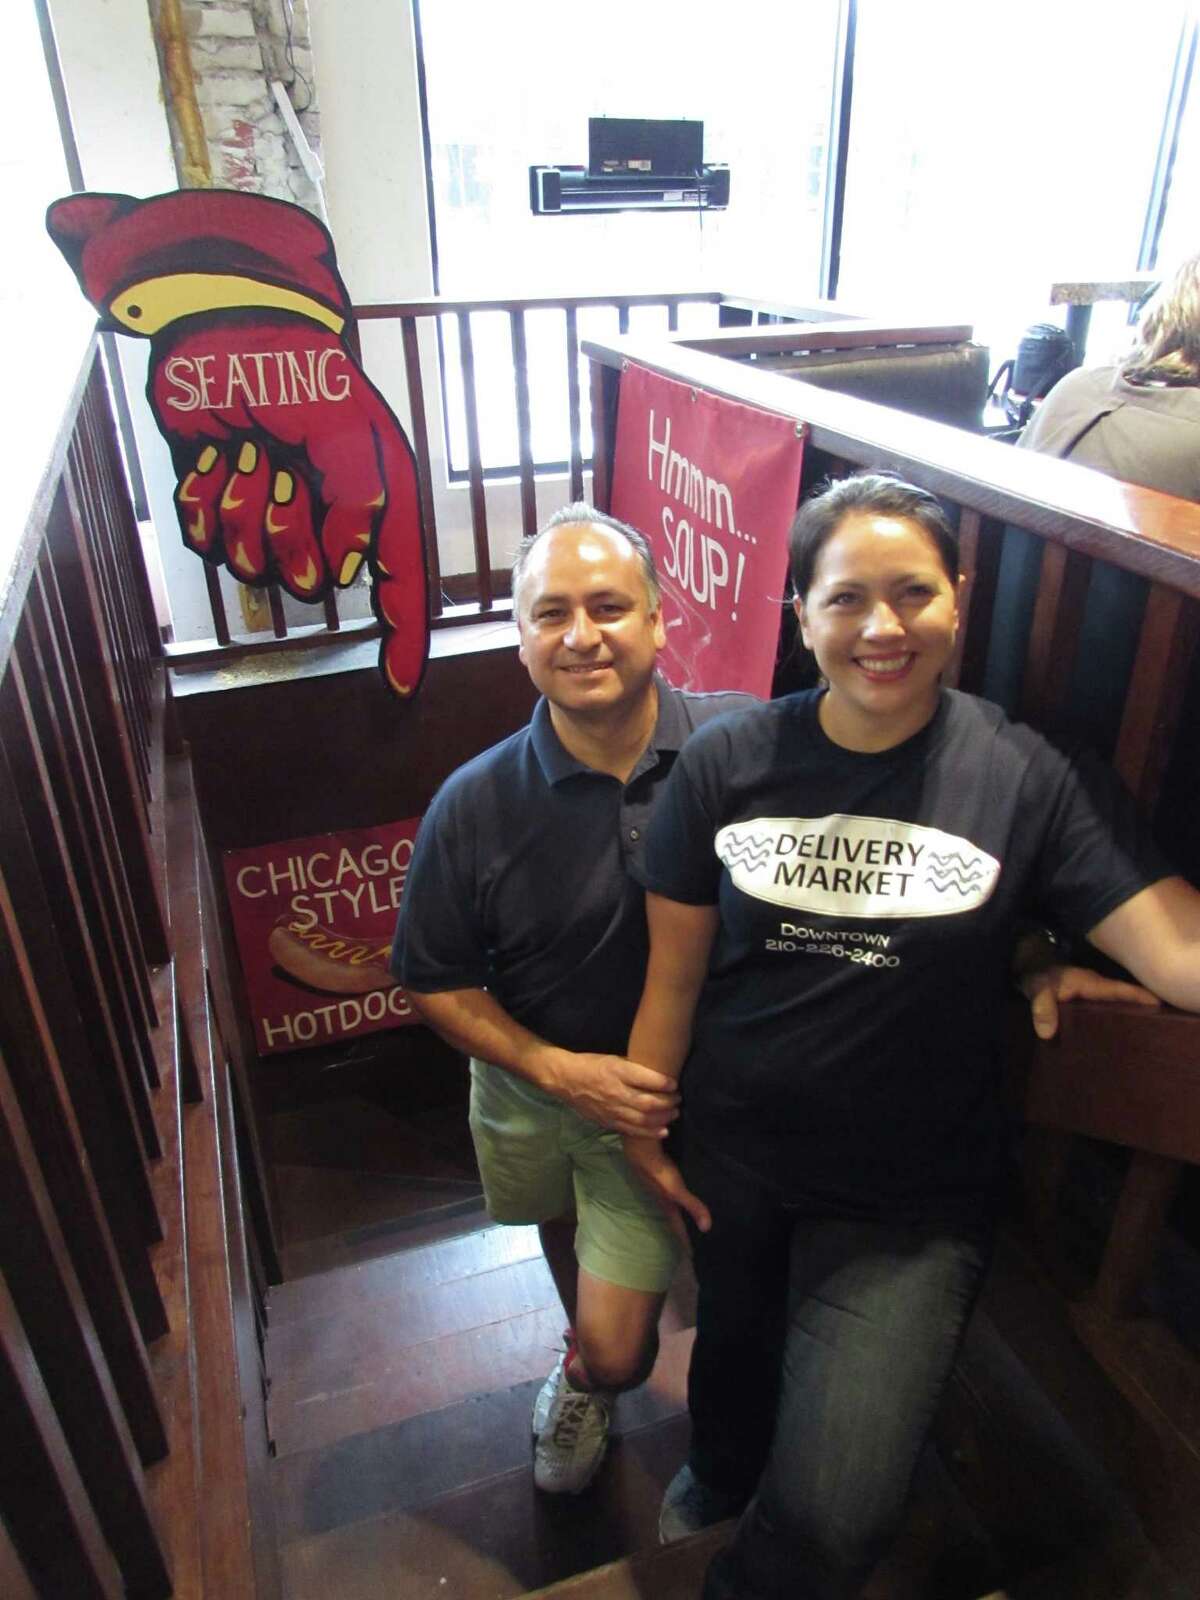 Delivery Market owners Roland and Ruby Polanco thanked regulars for their business and hinted at possible future projects.